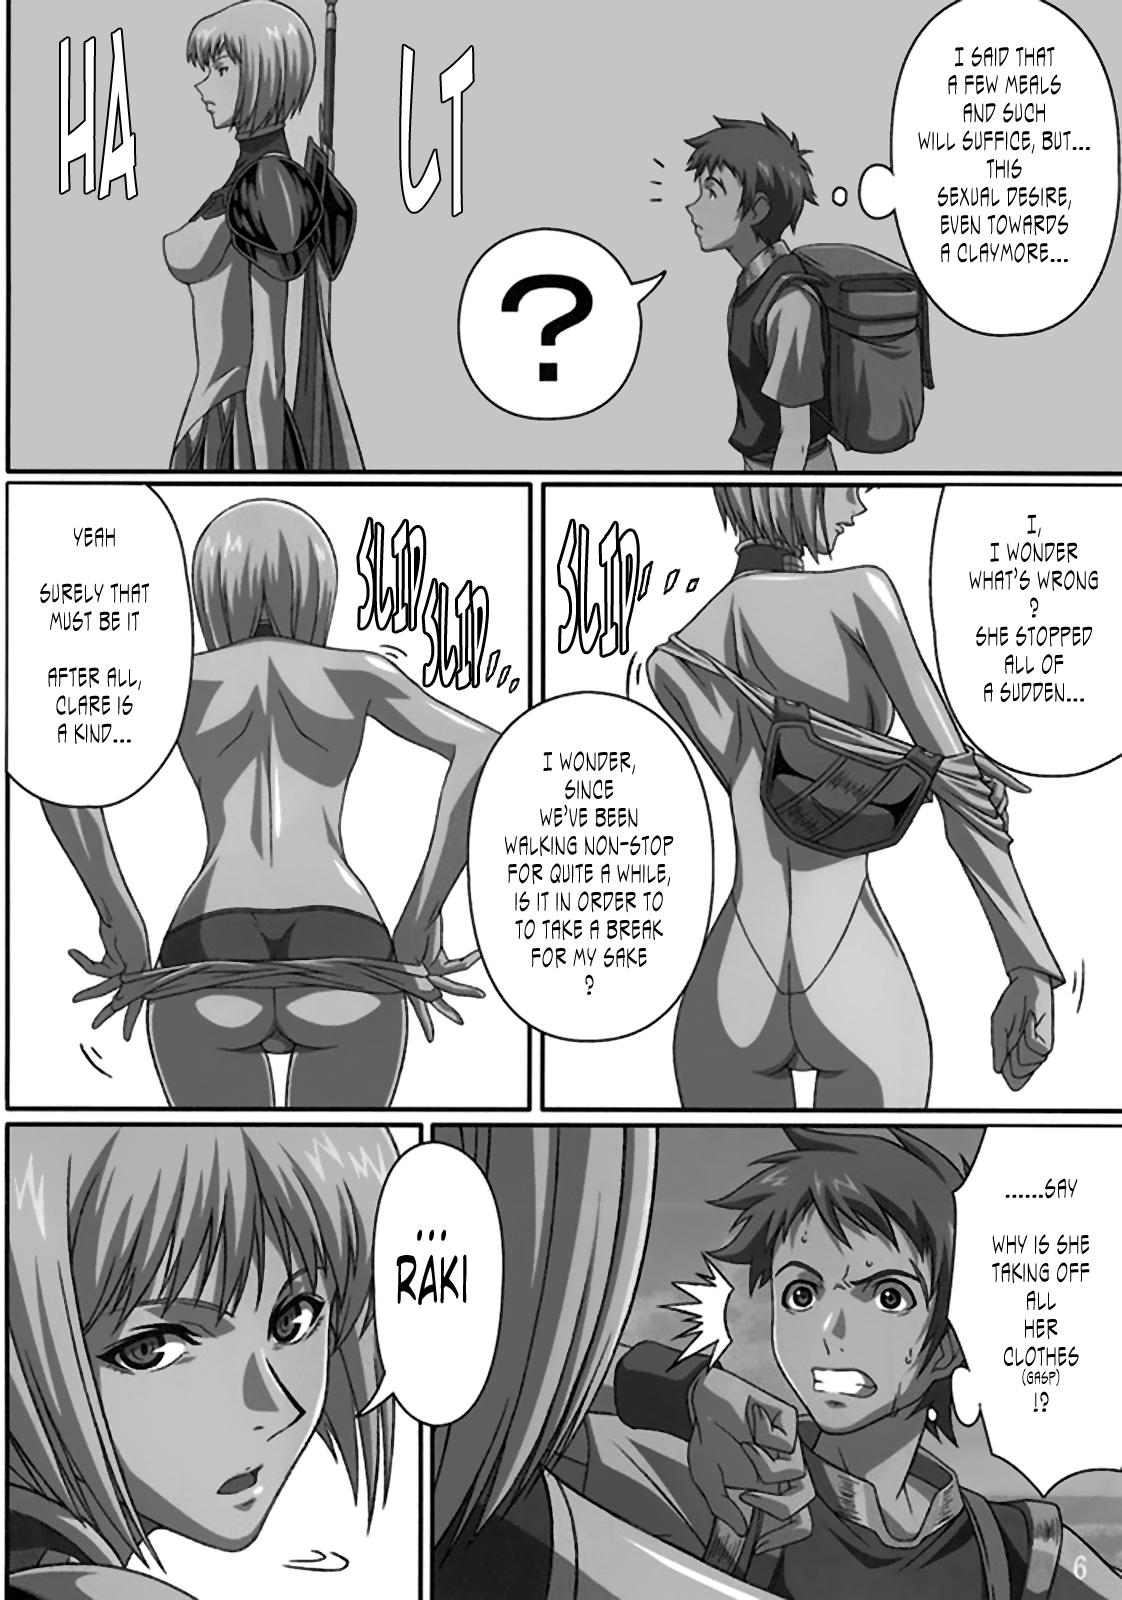 Perfect Body Industrial - Claymore Putinha - Page 5